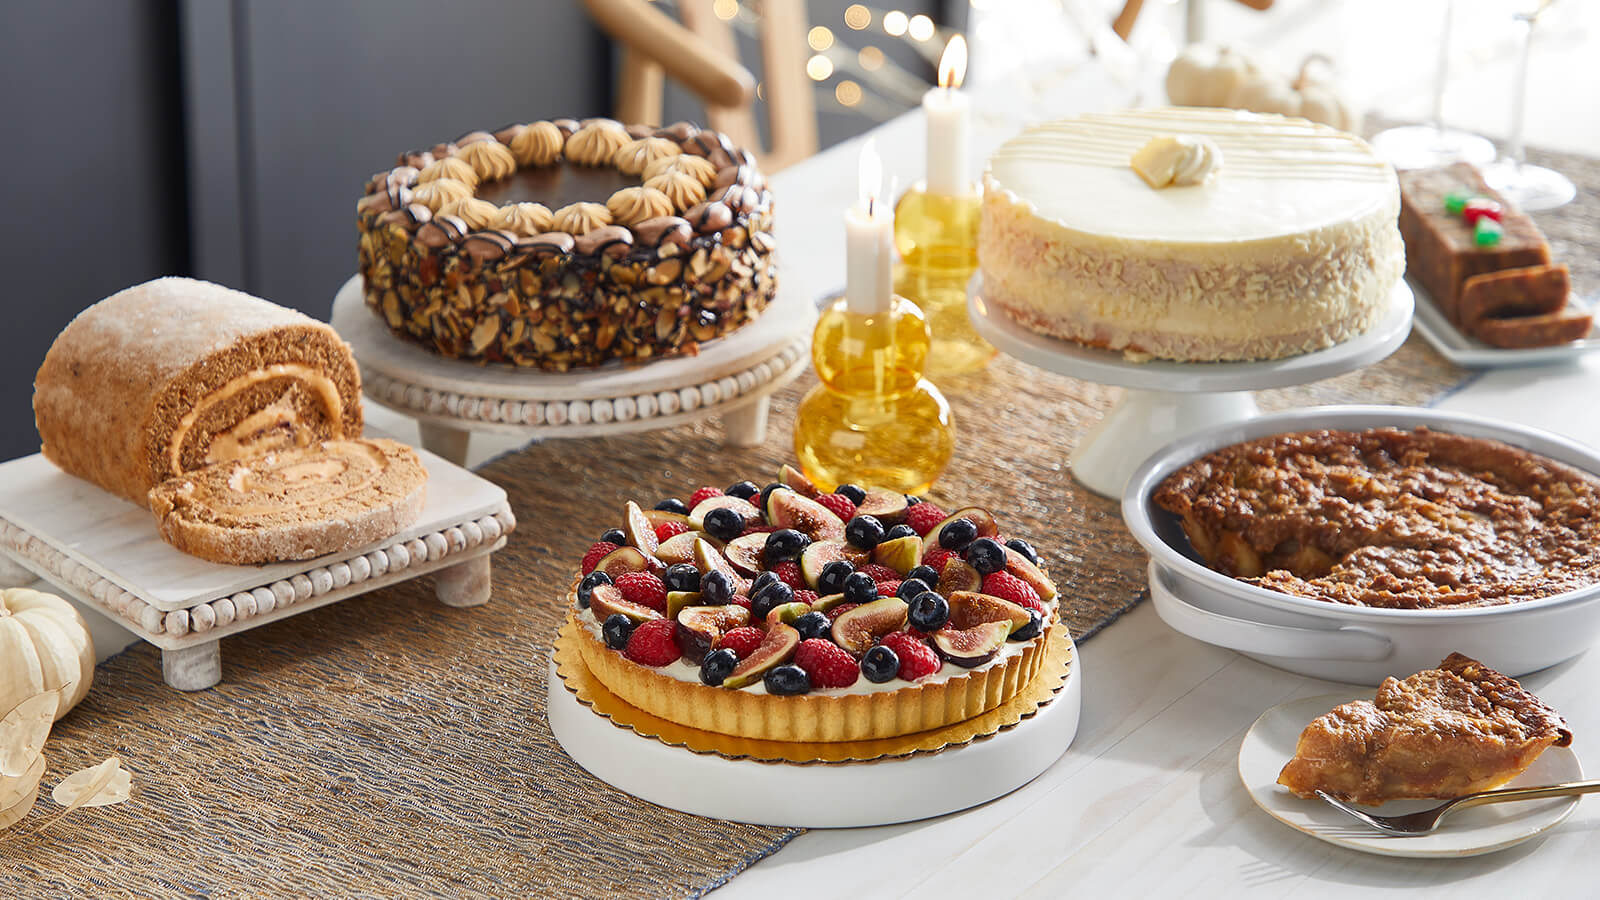 Global Cakes and Pastries Industry Market Research Report 2016:  JSBMarketResearch by Jack Richard - Issuu